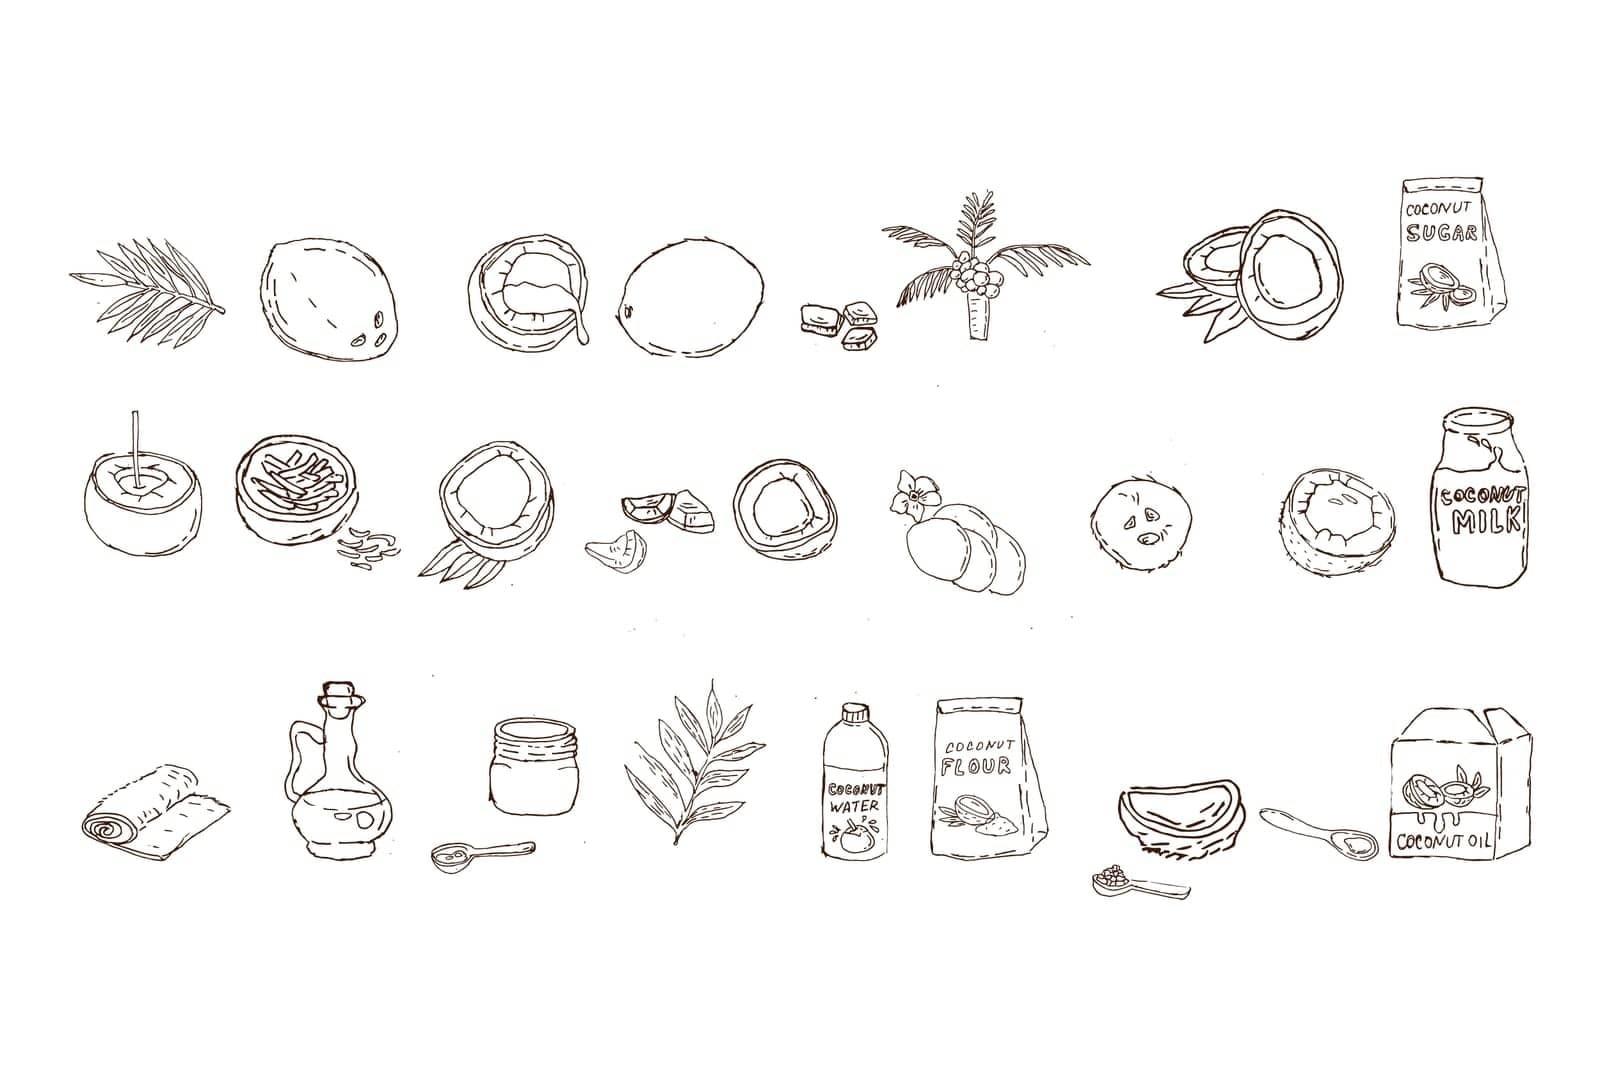 coconut and products from coconut - outline set. Vector illustration in doodle sketch style. Usable for wrapping papers, good labels, cosmetic products banners, postcards.